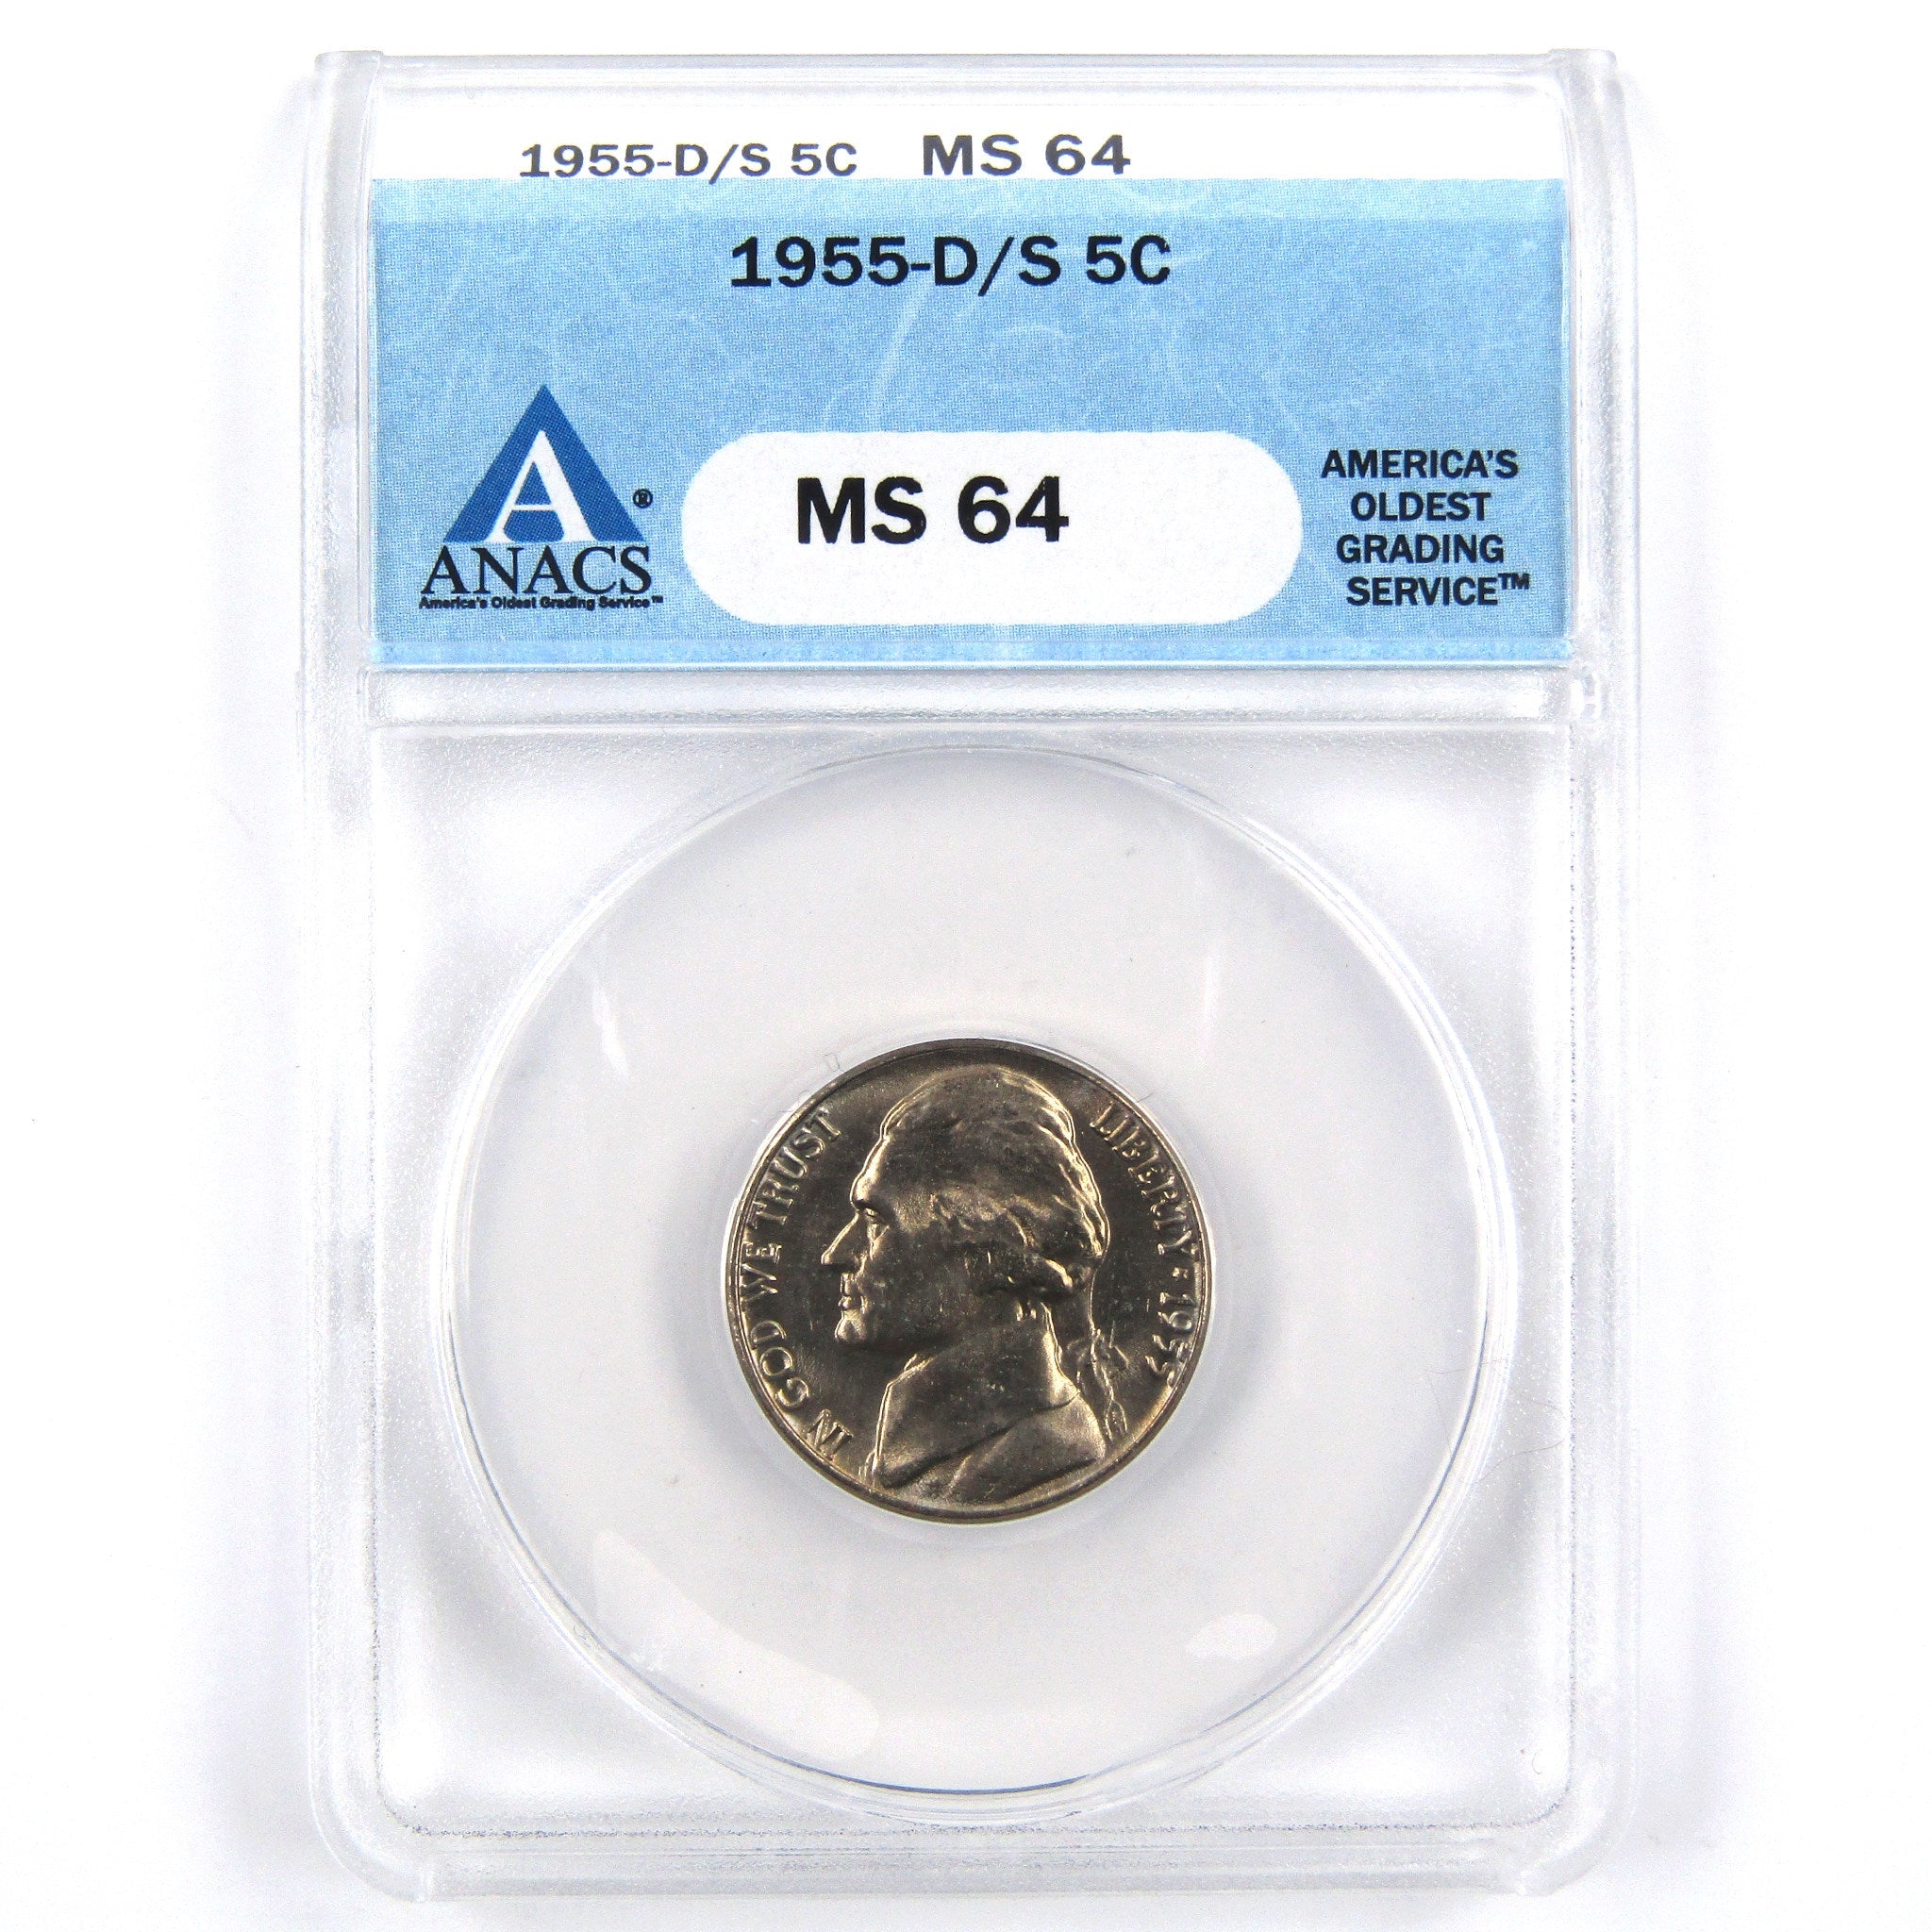 1955 D/S Jefferson Nickel MS 64 ANACS 5c Uncirculated Coin SKU:CPC2362